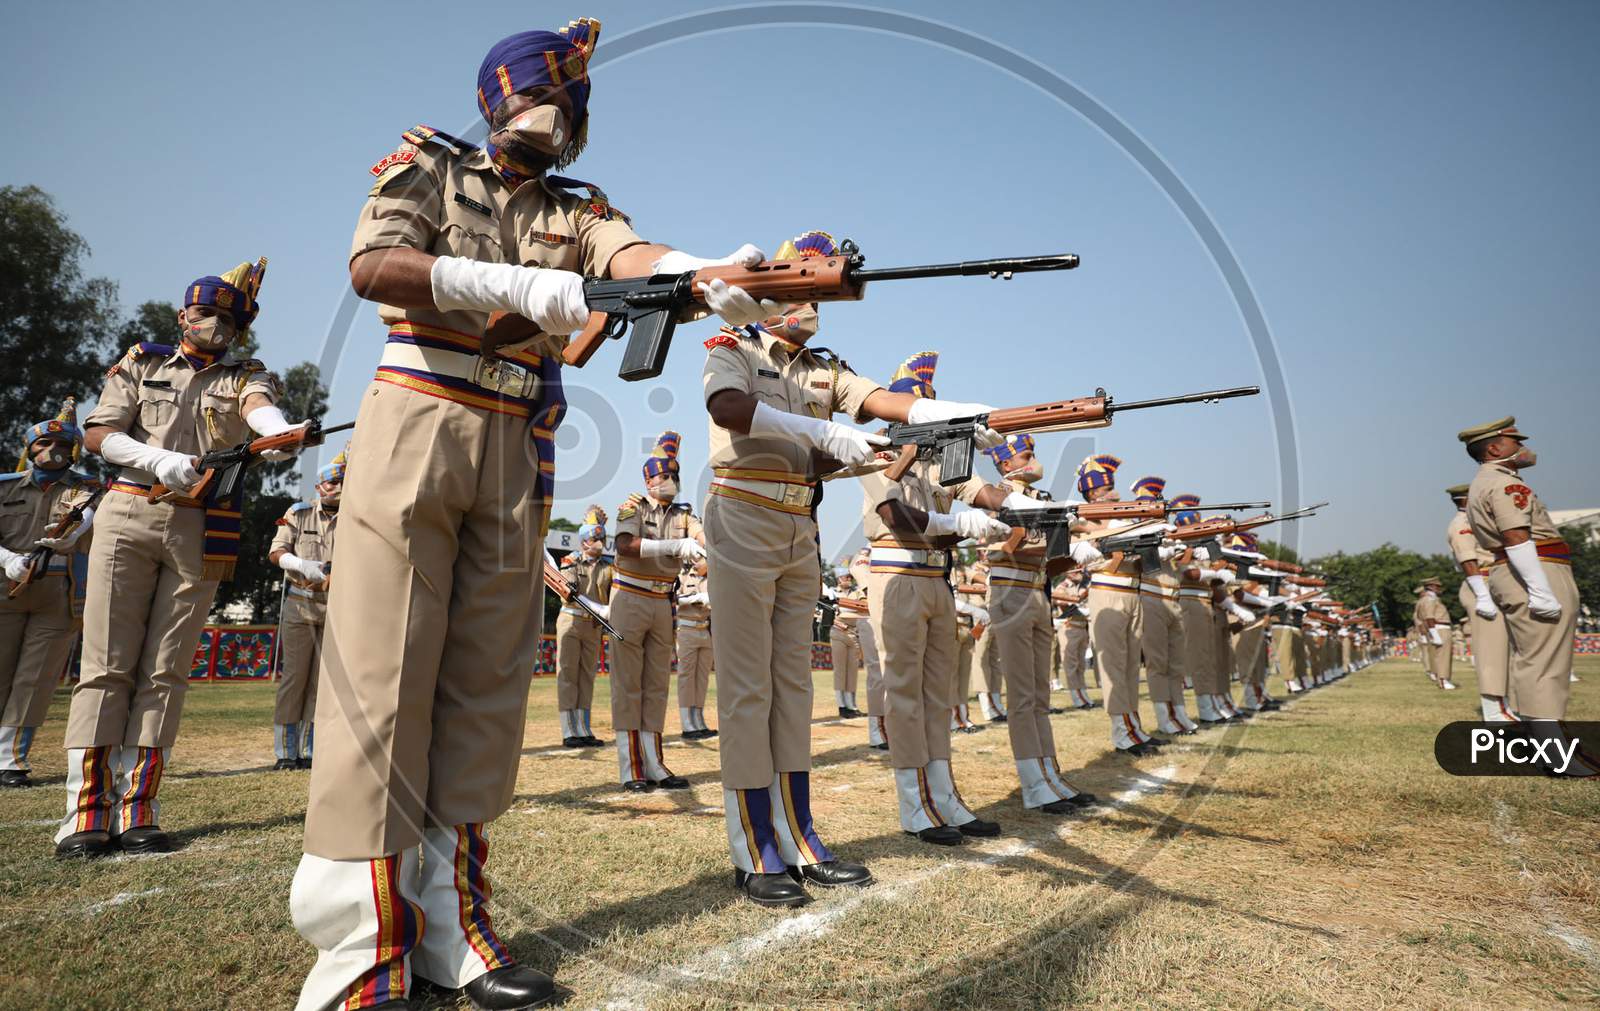 Jammu & kashmir Police take part in a tribute ceremony and parade during Police Commemoration Day in Jammu  on 21 October,2020.